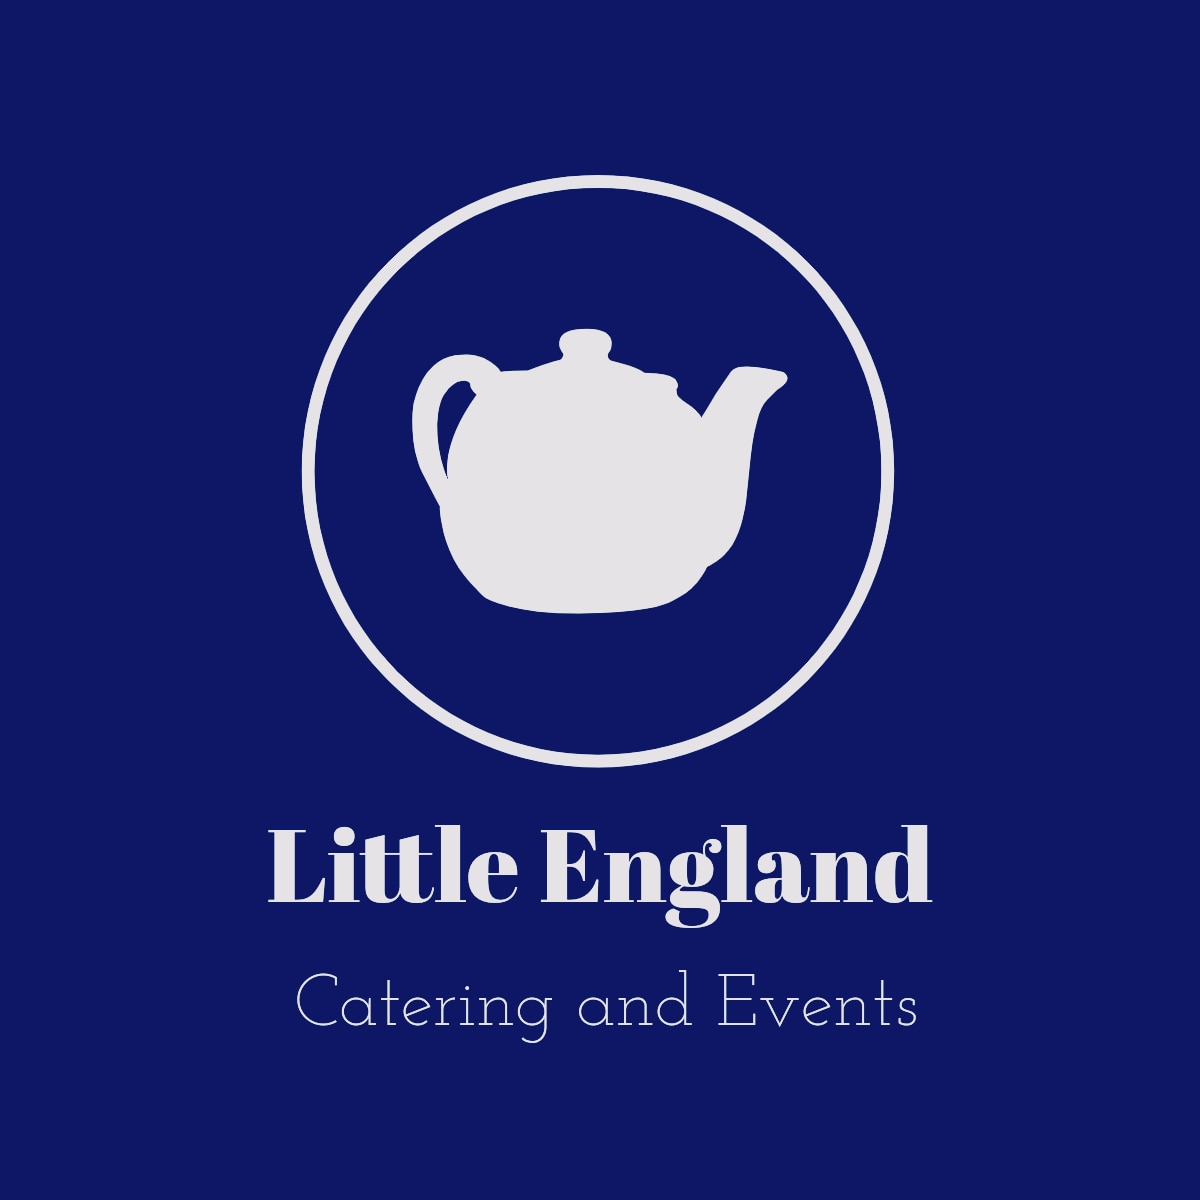 Little England Catering Company Offers Ultimate Wedding Rental Décor Guide